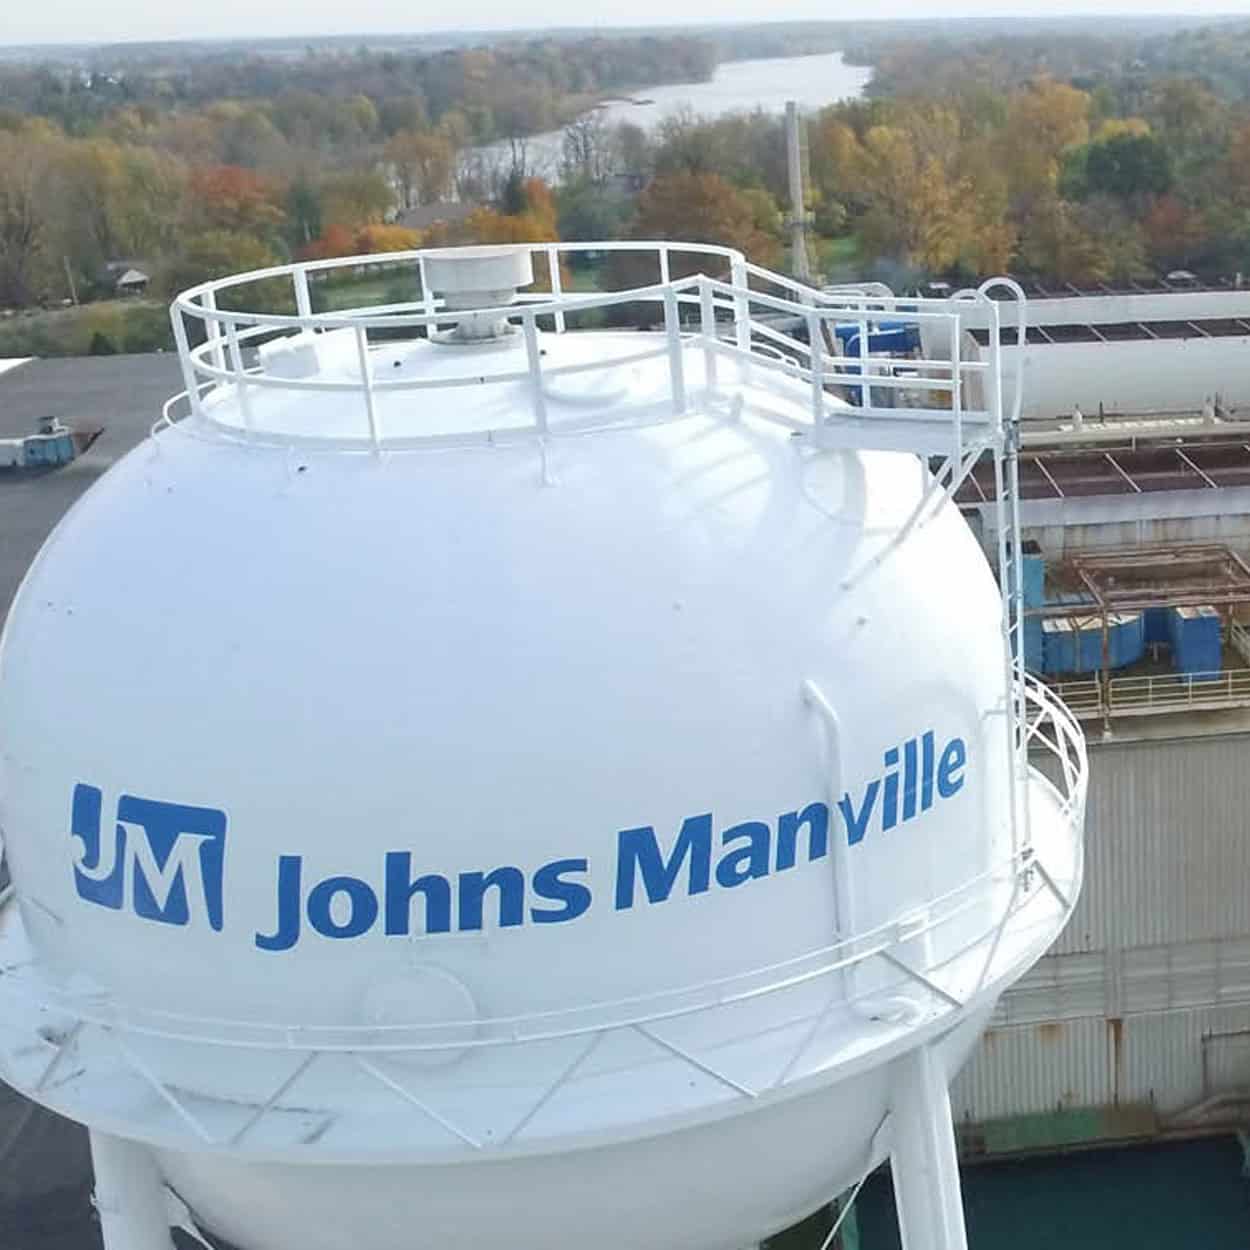 Ariel view of Johns Manville water tower